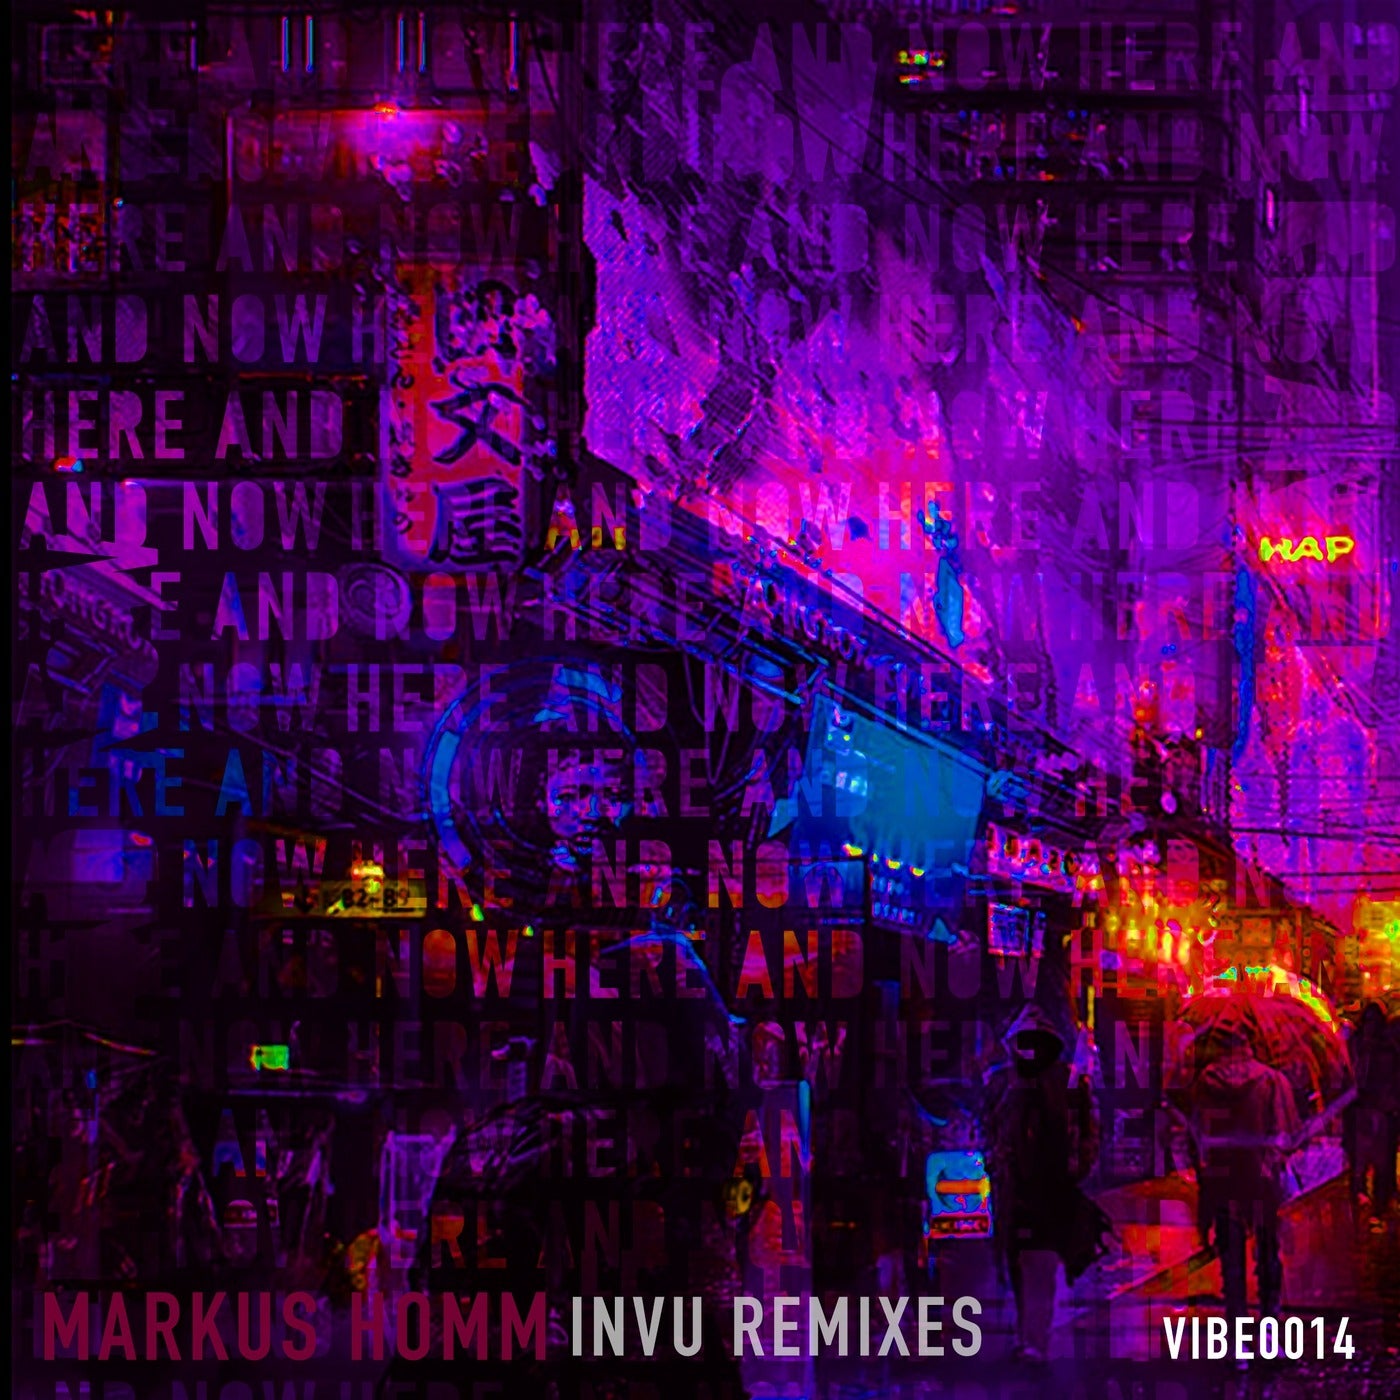 Markus Homm – Here And Now – INVU Remixes [VIBE0014]